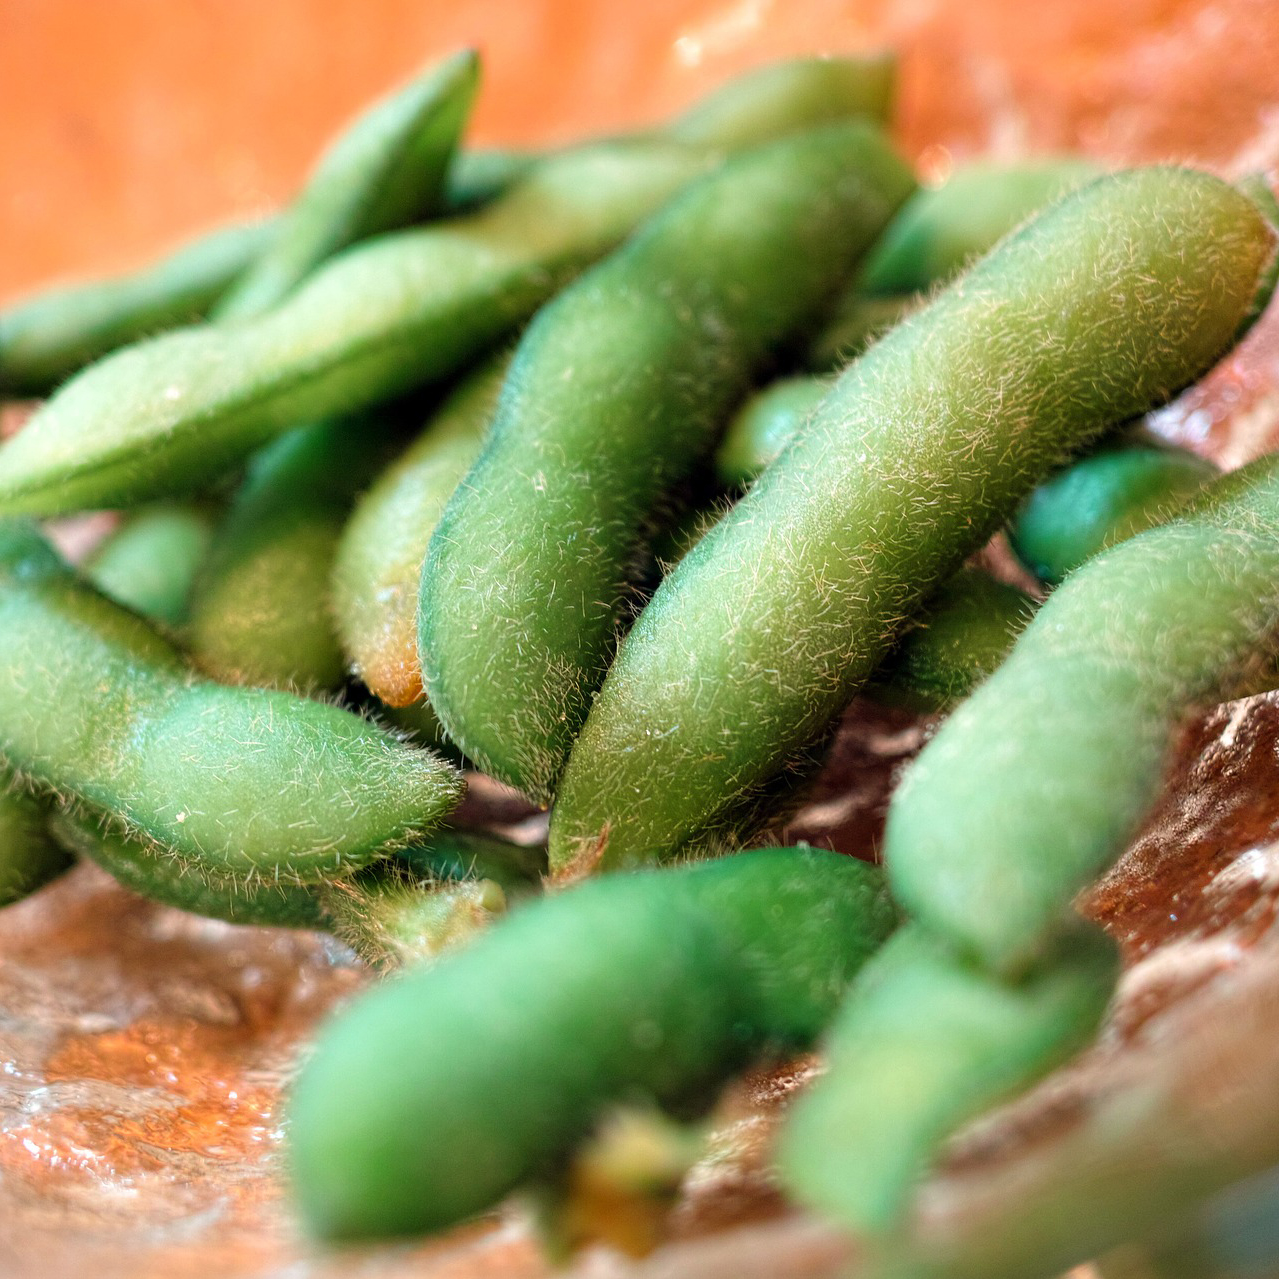 Edamame Nutrition Facts and Health Benefits